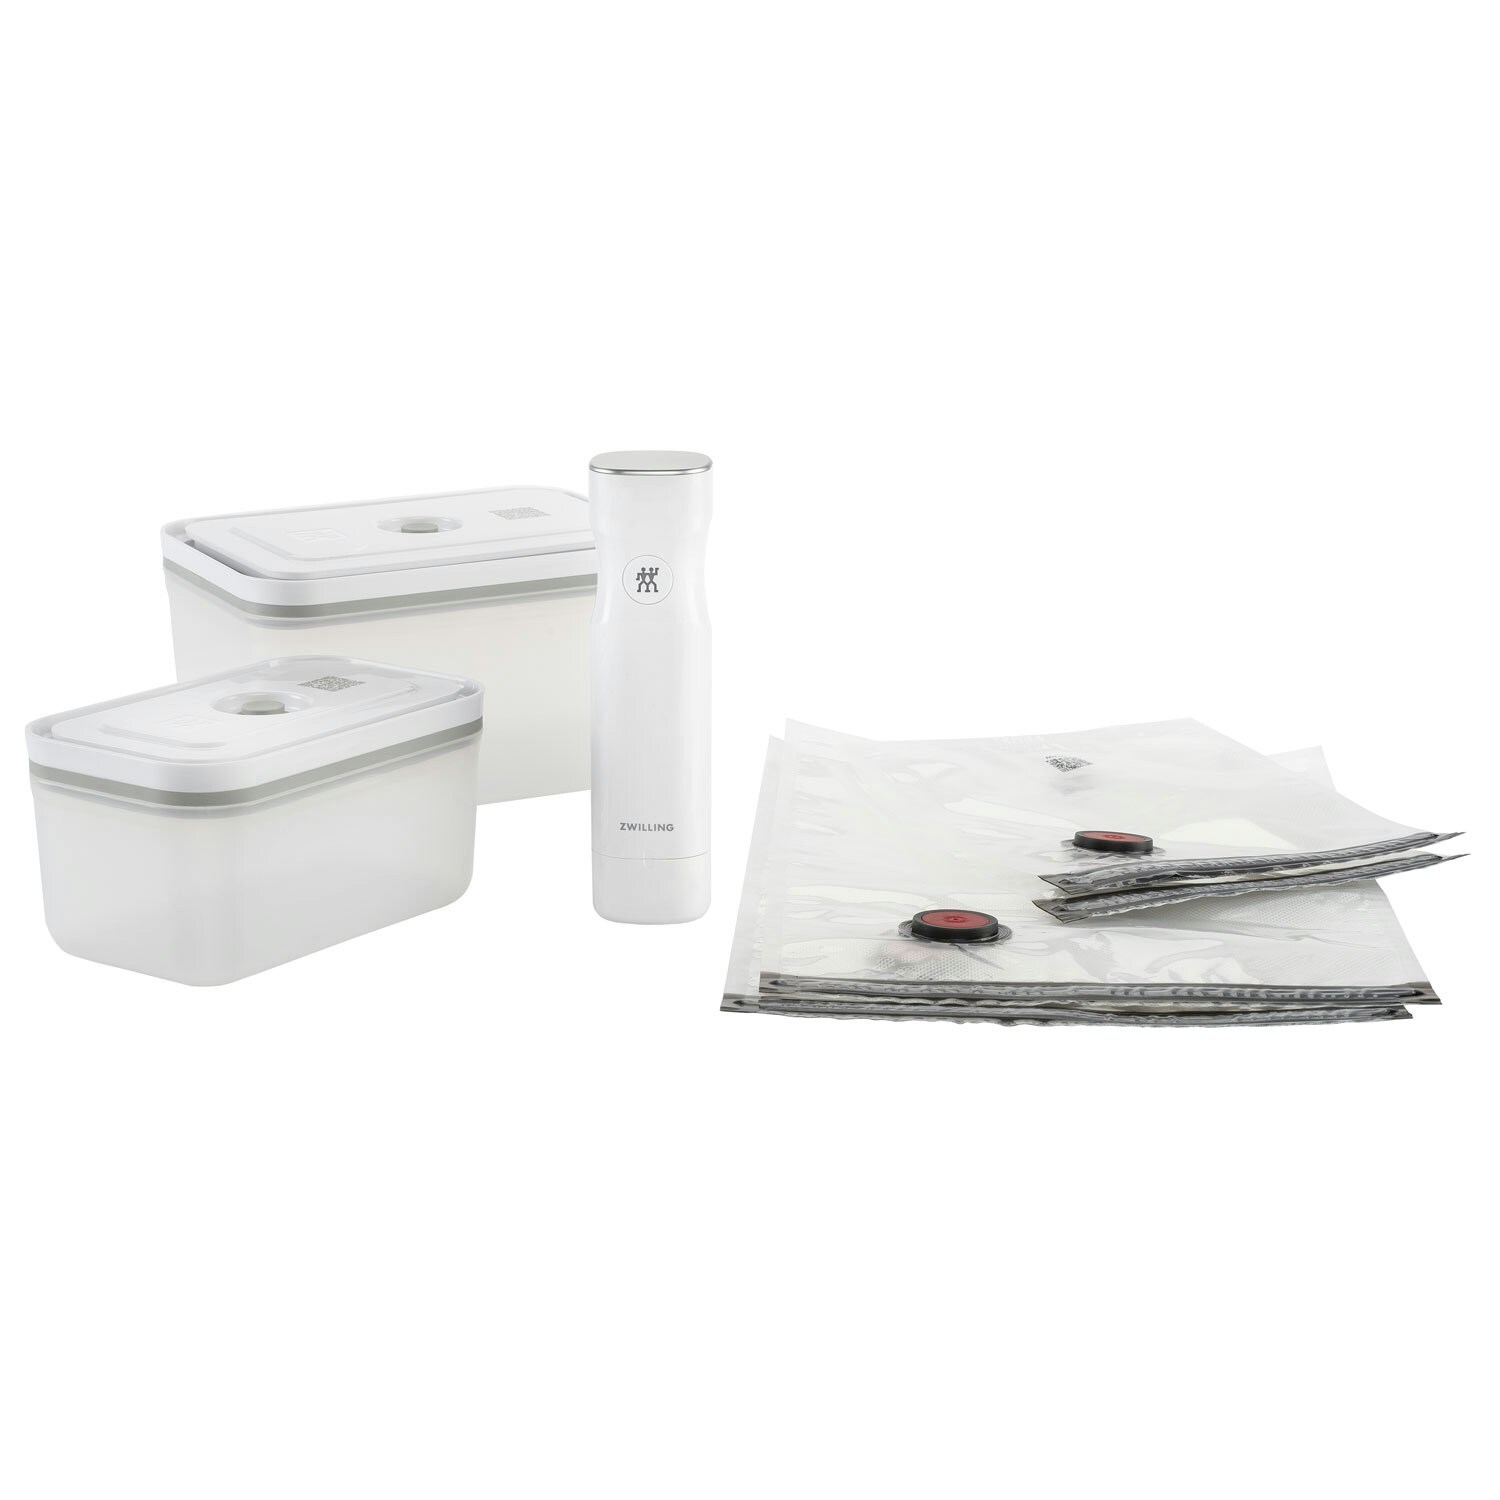 https://royaldesign.com/image/2/zwilling-fresh-save-starter-kit-with-vacuum-pump-bags-containers-in-plastic-7-pieces-0